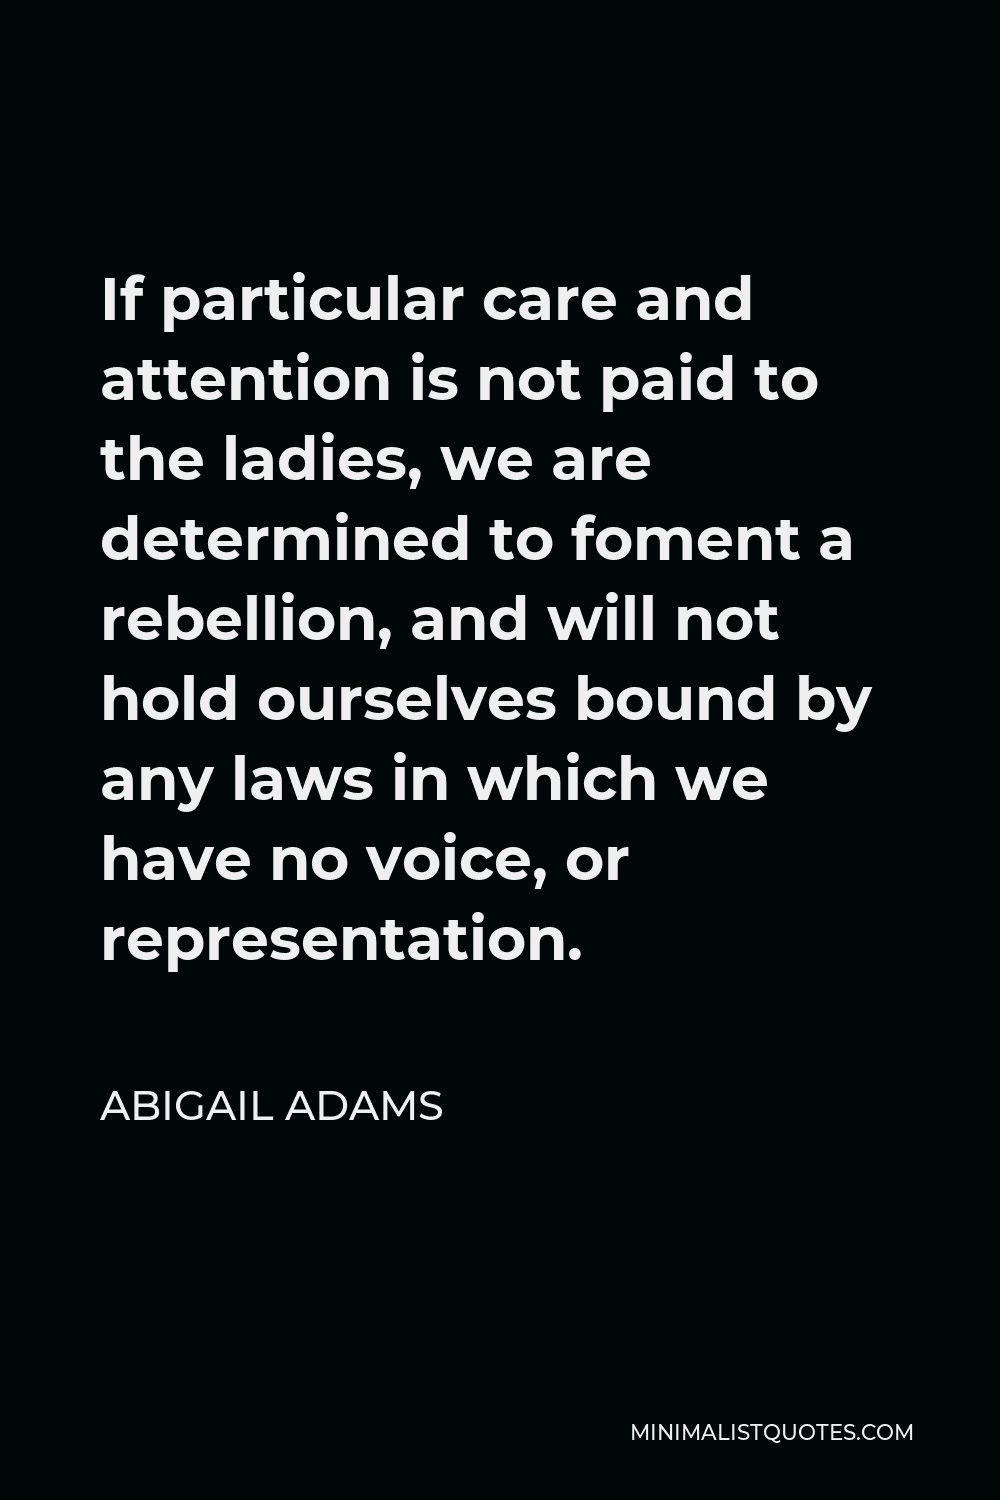 Abigail Adams Quote - If particular care and attention is not paid to the ladies, we are determined to foment a rebellion, and will not hold ourselves bound by any laws in which we have no voice, or representation.